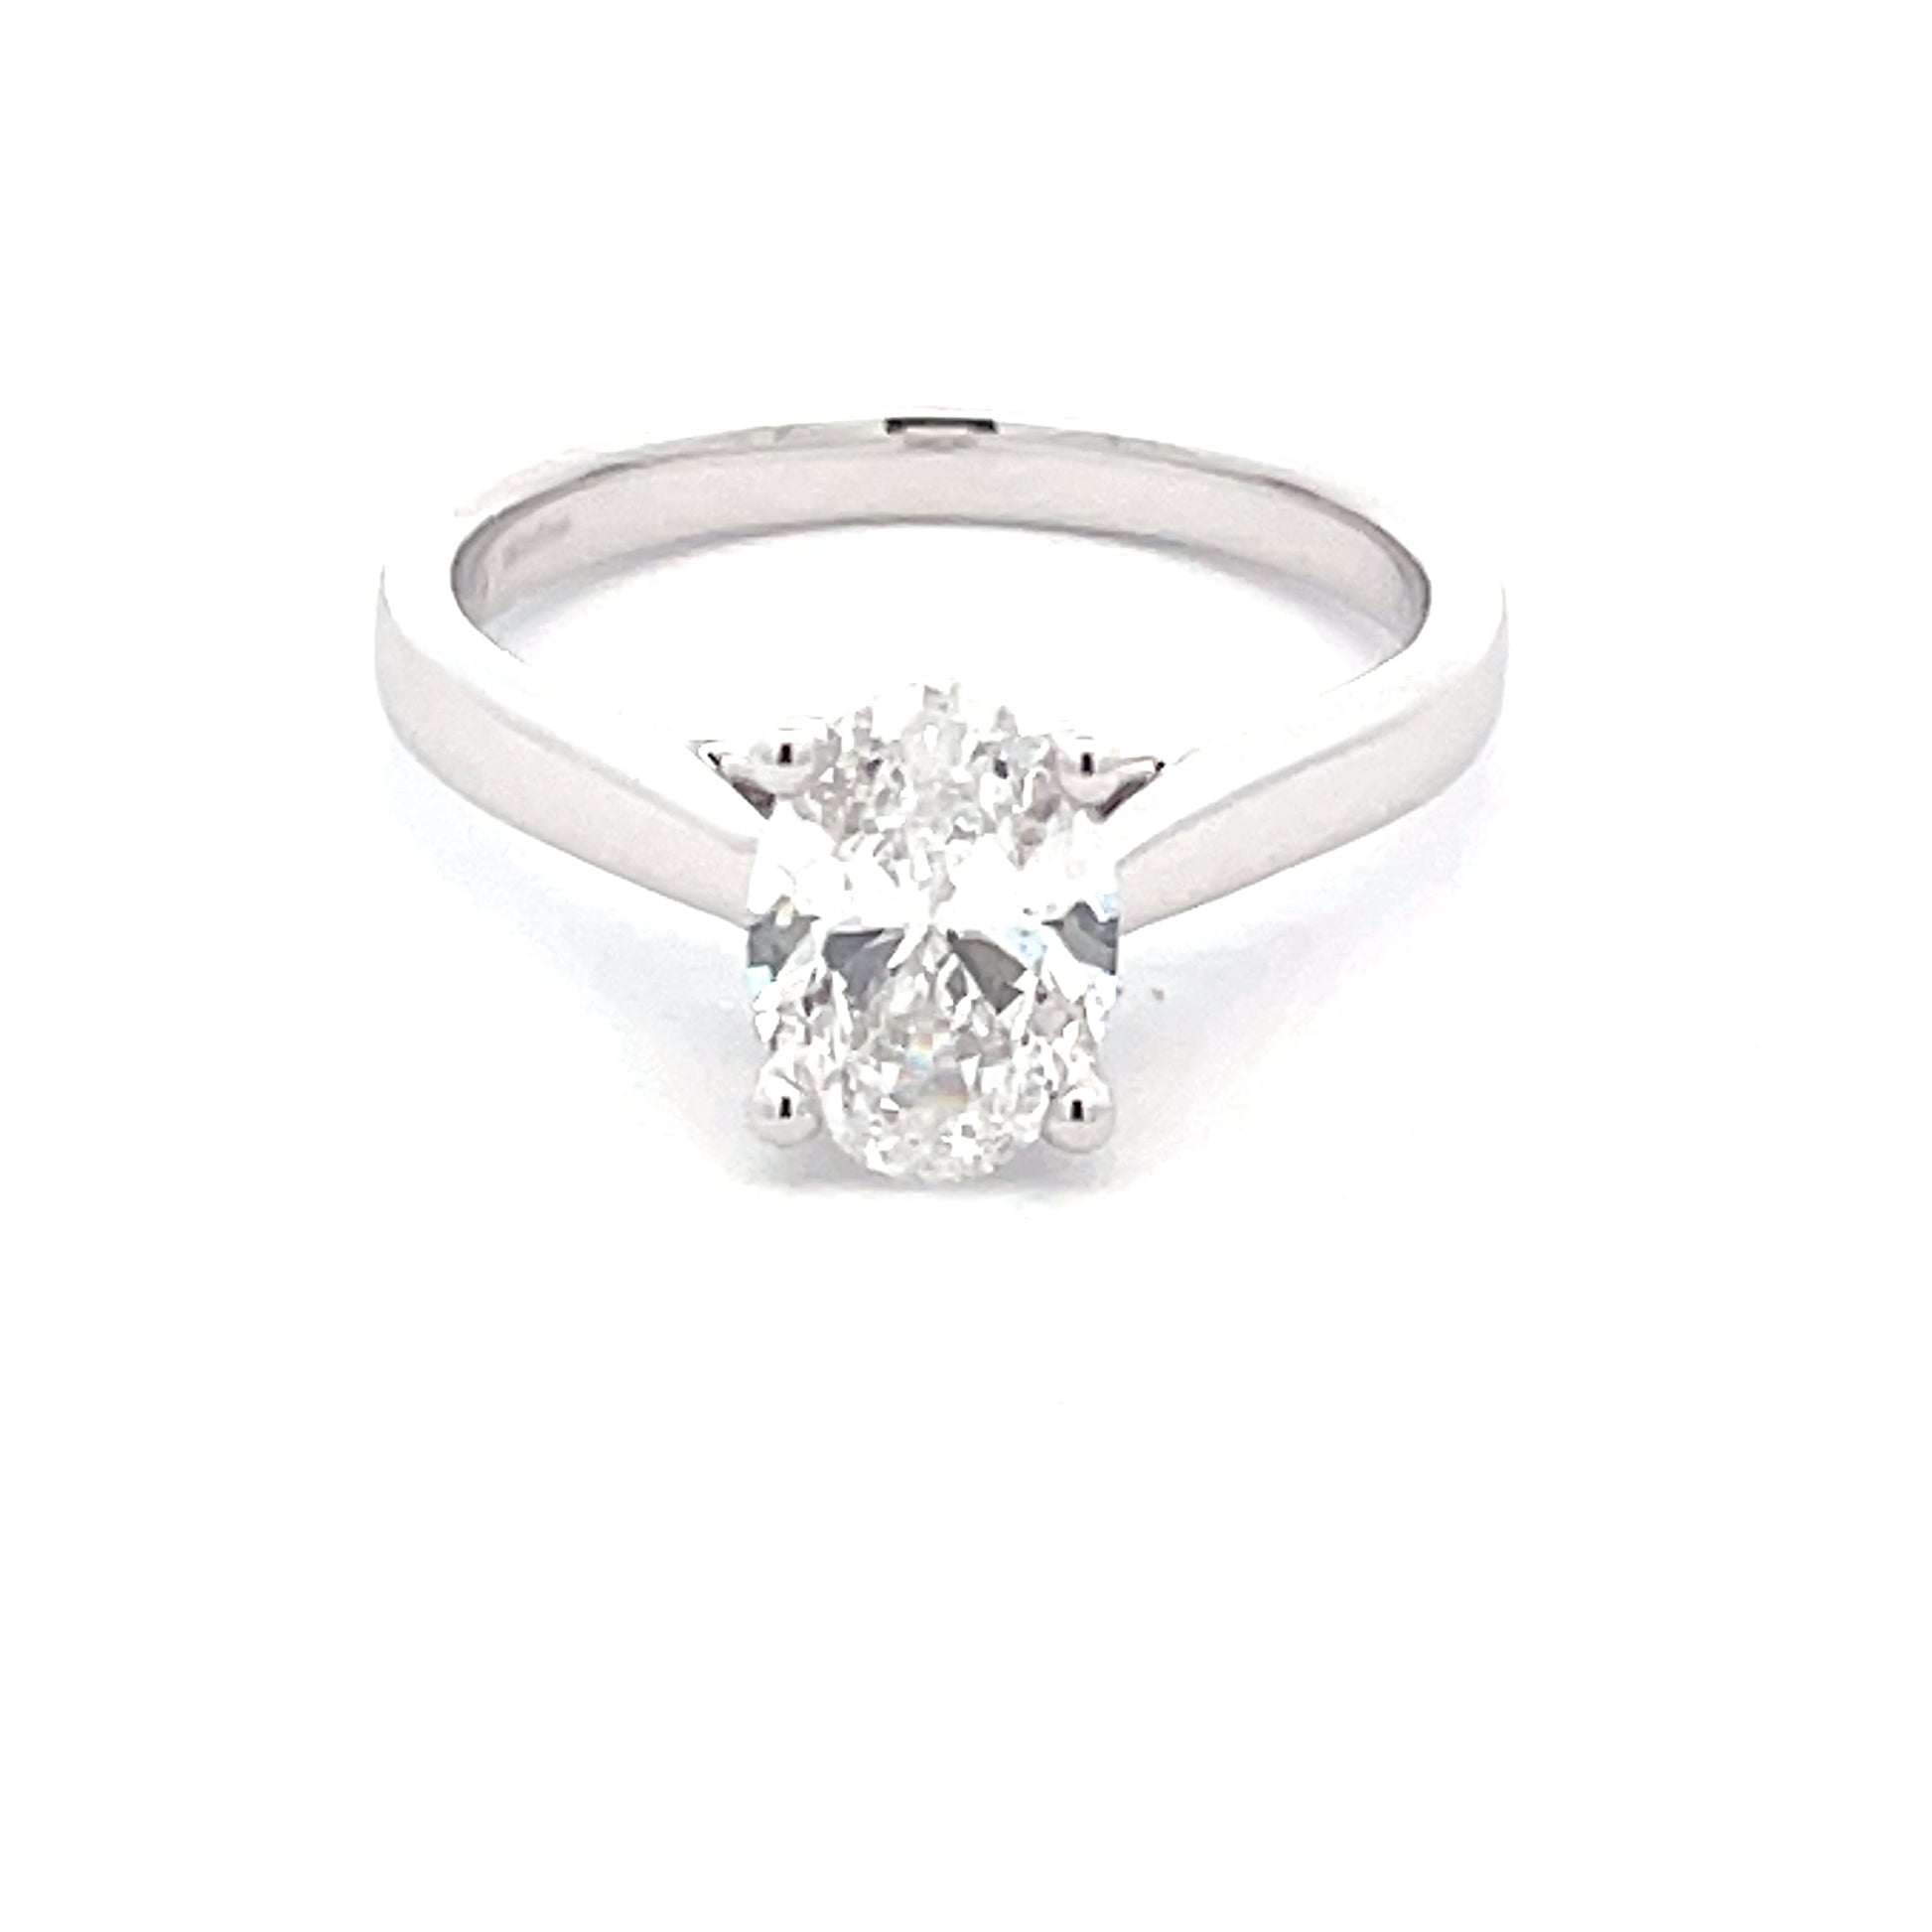 LAB GROWN OVAL SHAPED DIAMOND SOLITAIRE RING - 1.23CTS  Gardiner Brothers   